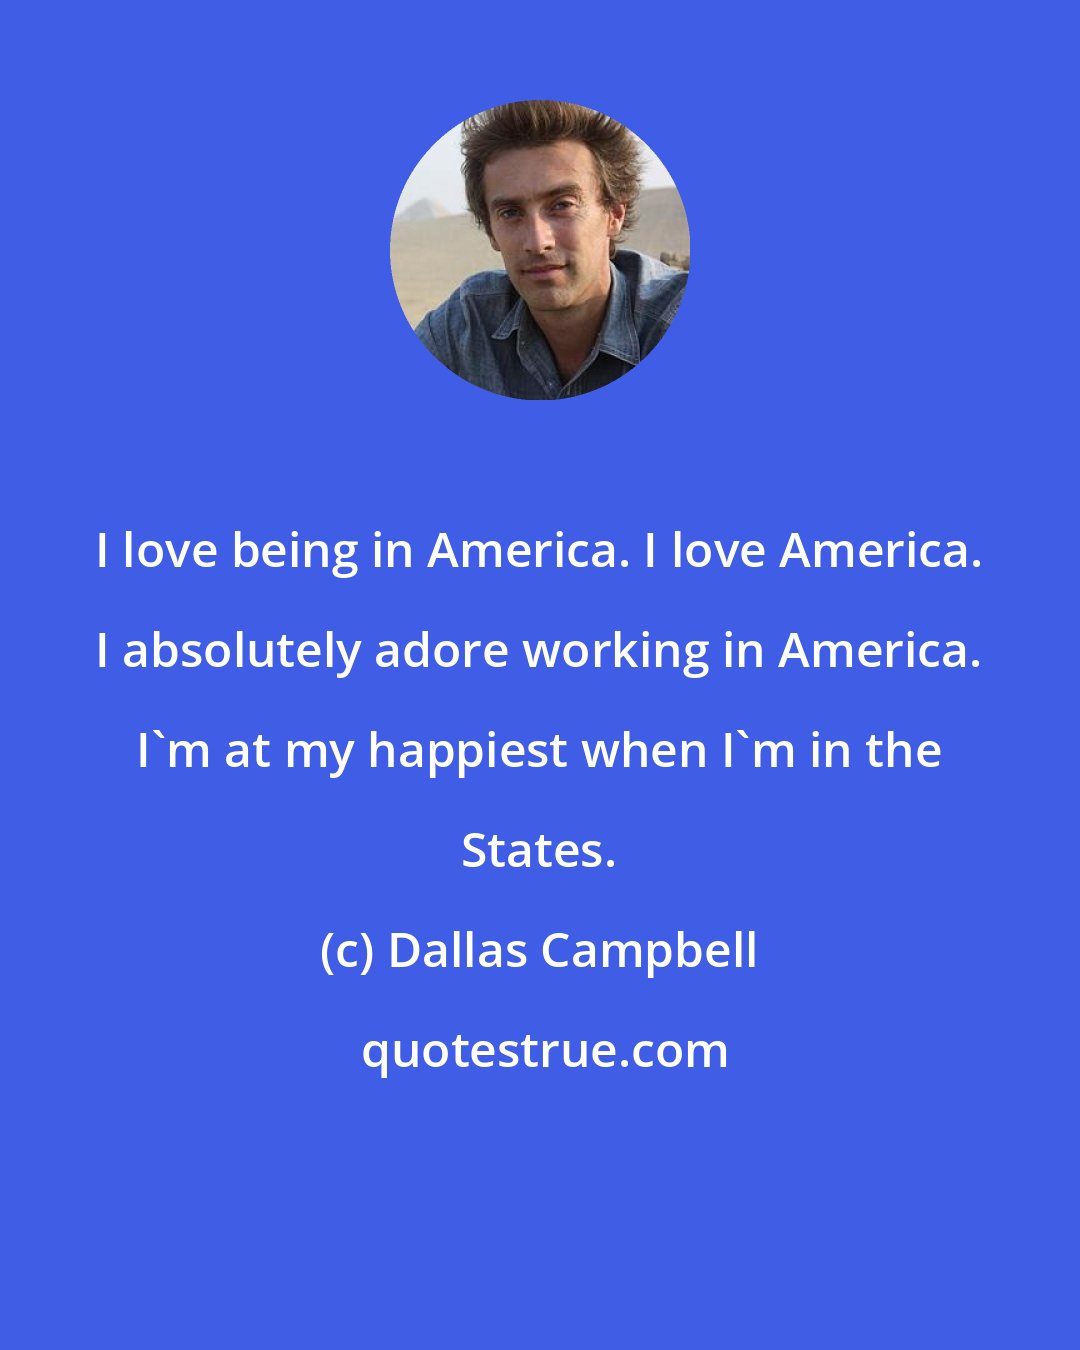 Dallas Campbell: I love being in America. I love America. I absolutely adore working in America. I'm at my happiest when I'm in the States.